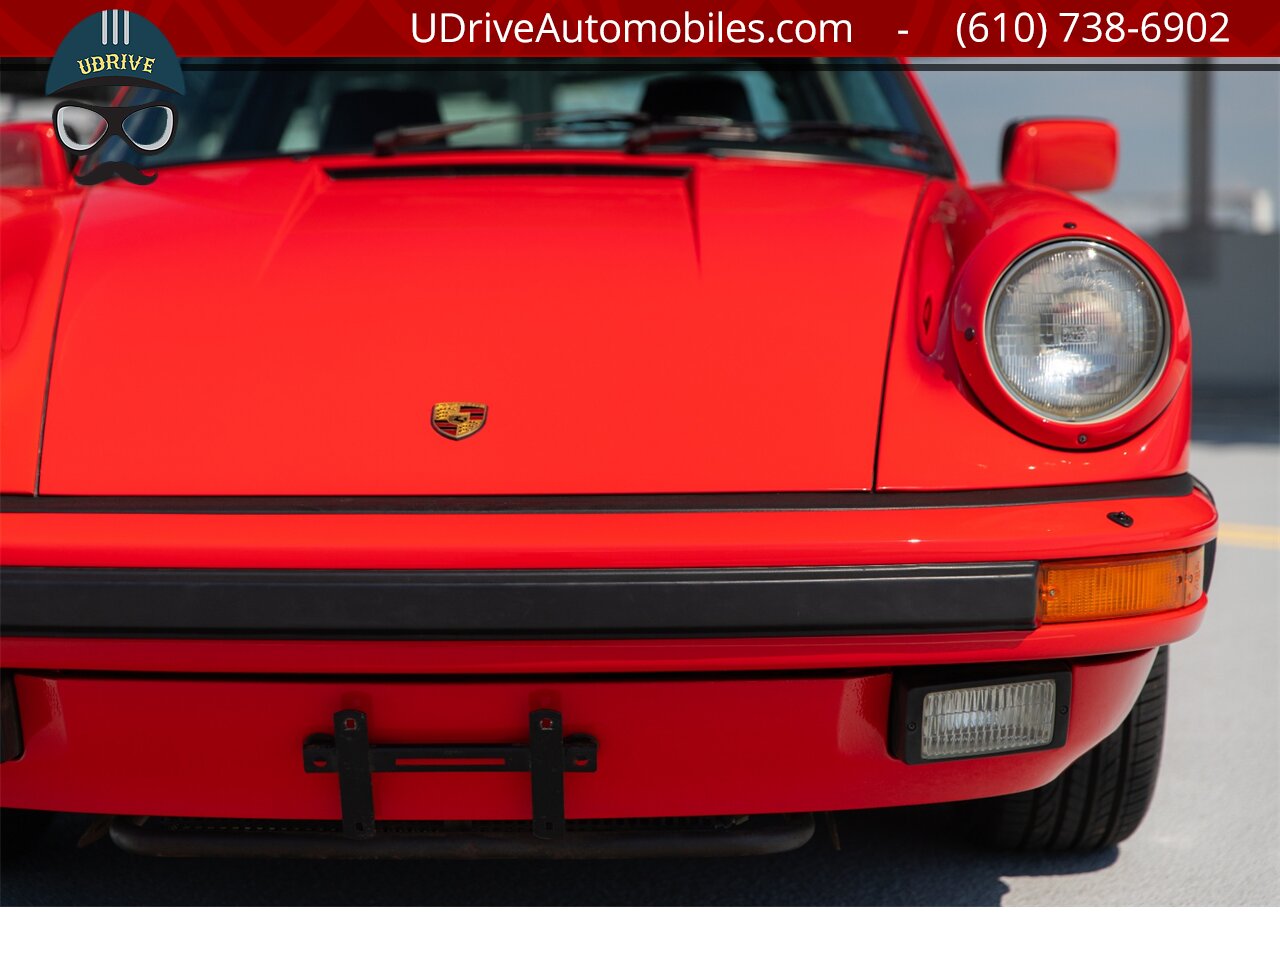 1986 Porsche 911 Carrera Targa 39k Miles Same Owner Since 1988  $23k in Service History Since 2011 - Photo 14 - West Chester, PA 19382